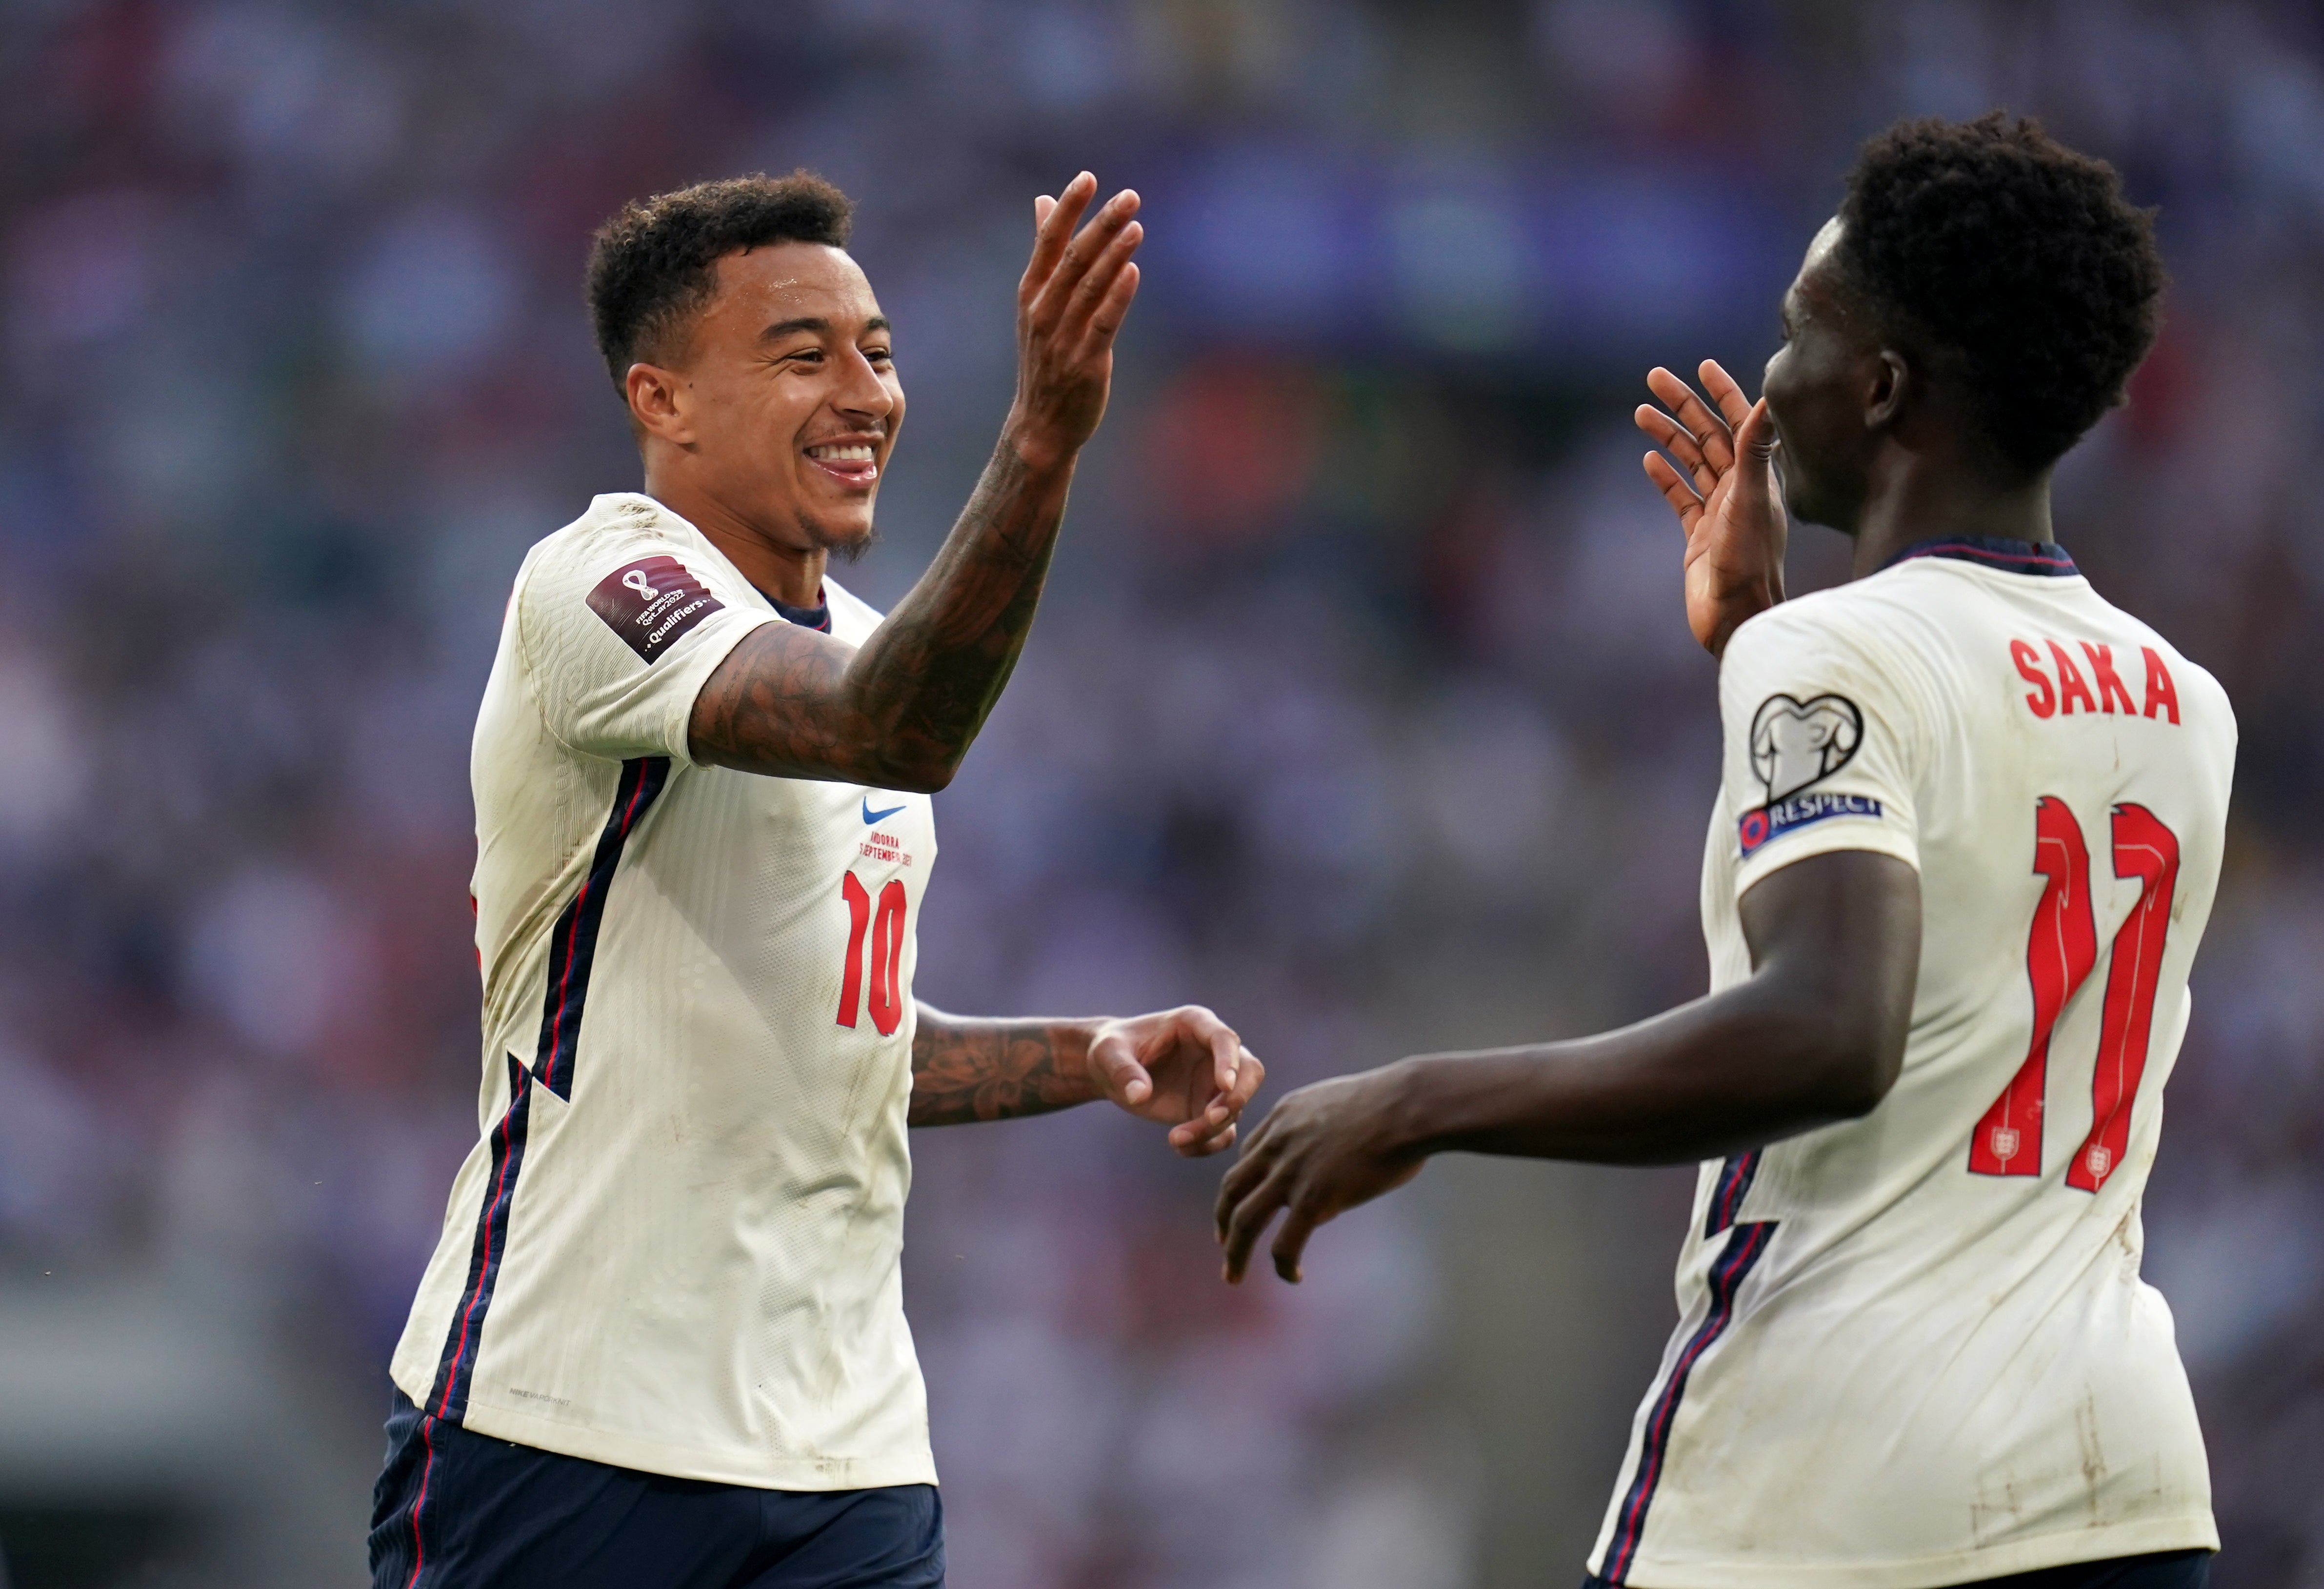 Jesse Lingard, left, celebrates with Saka, right, after scoring one of his two goals against Andorra (Nick Potts/PA)